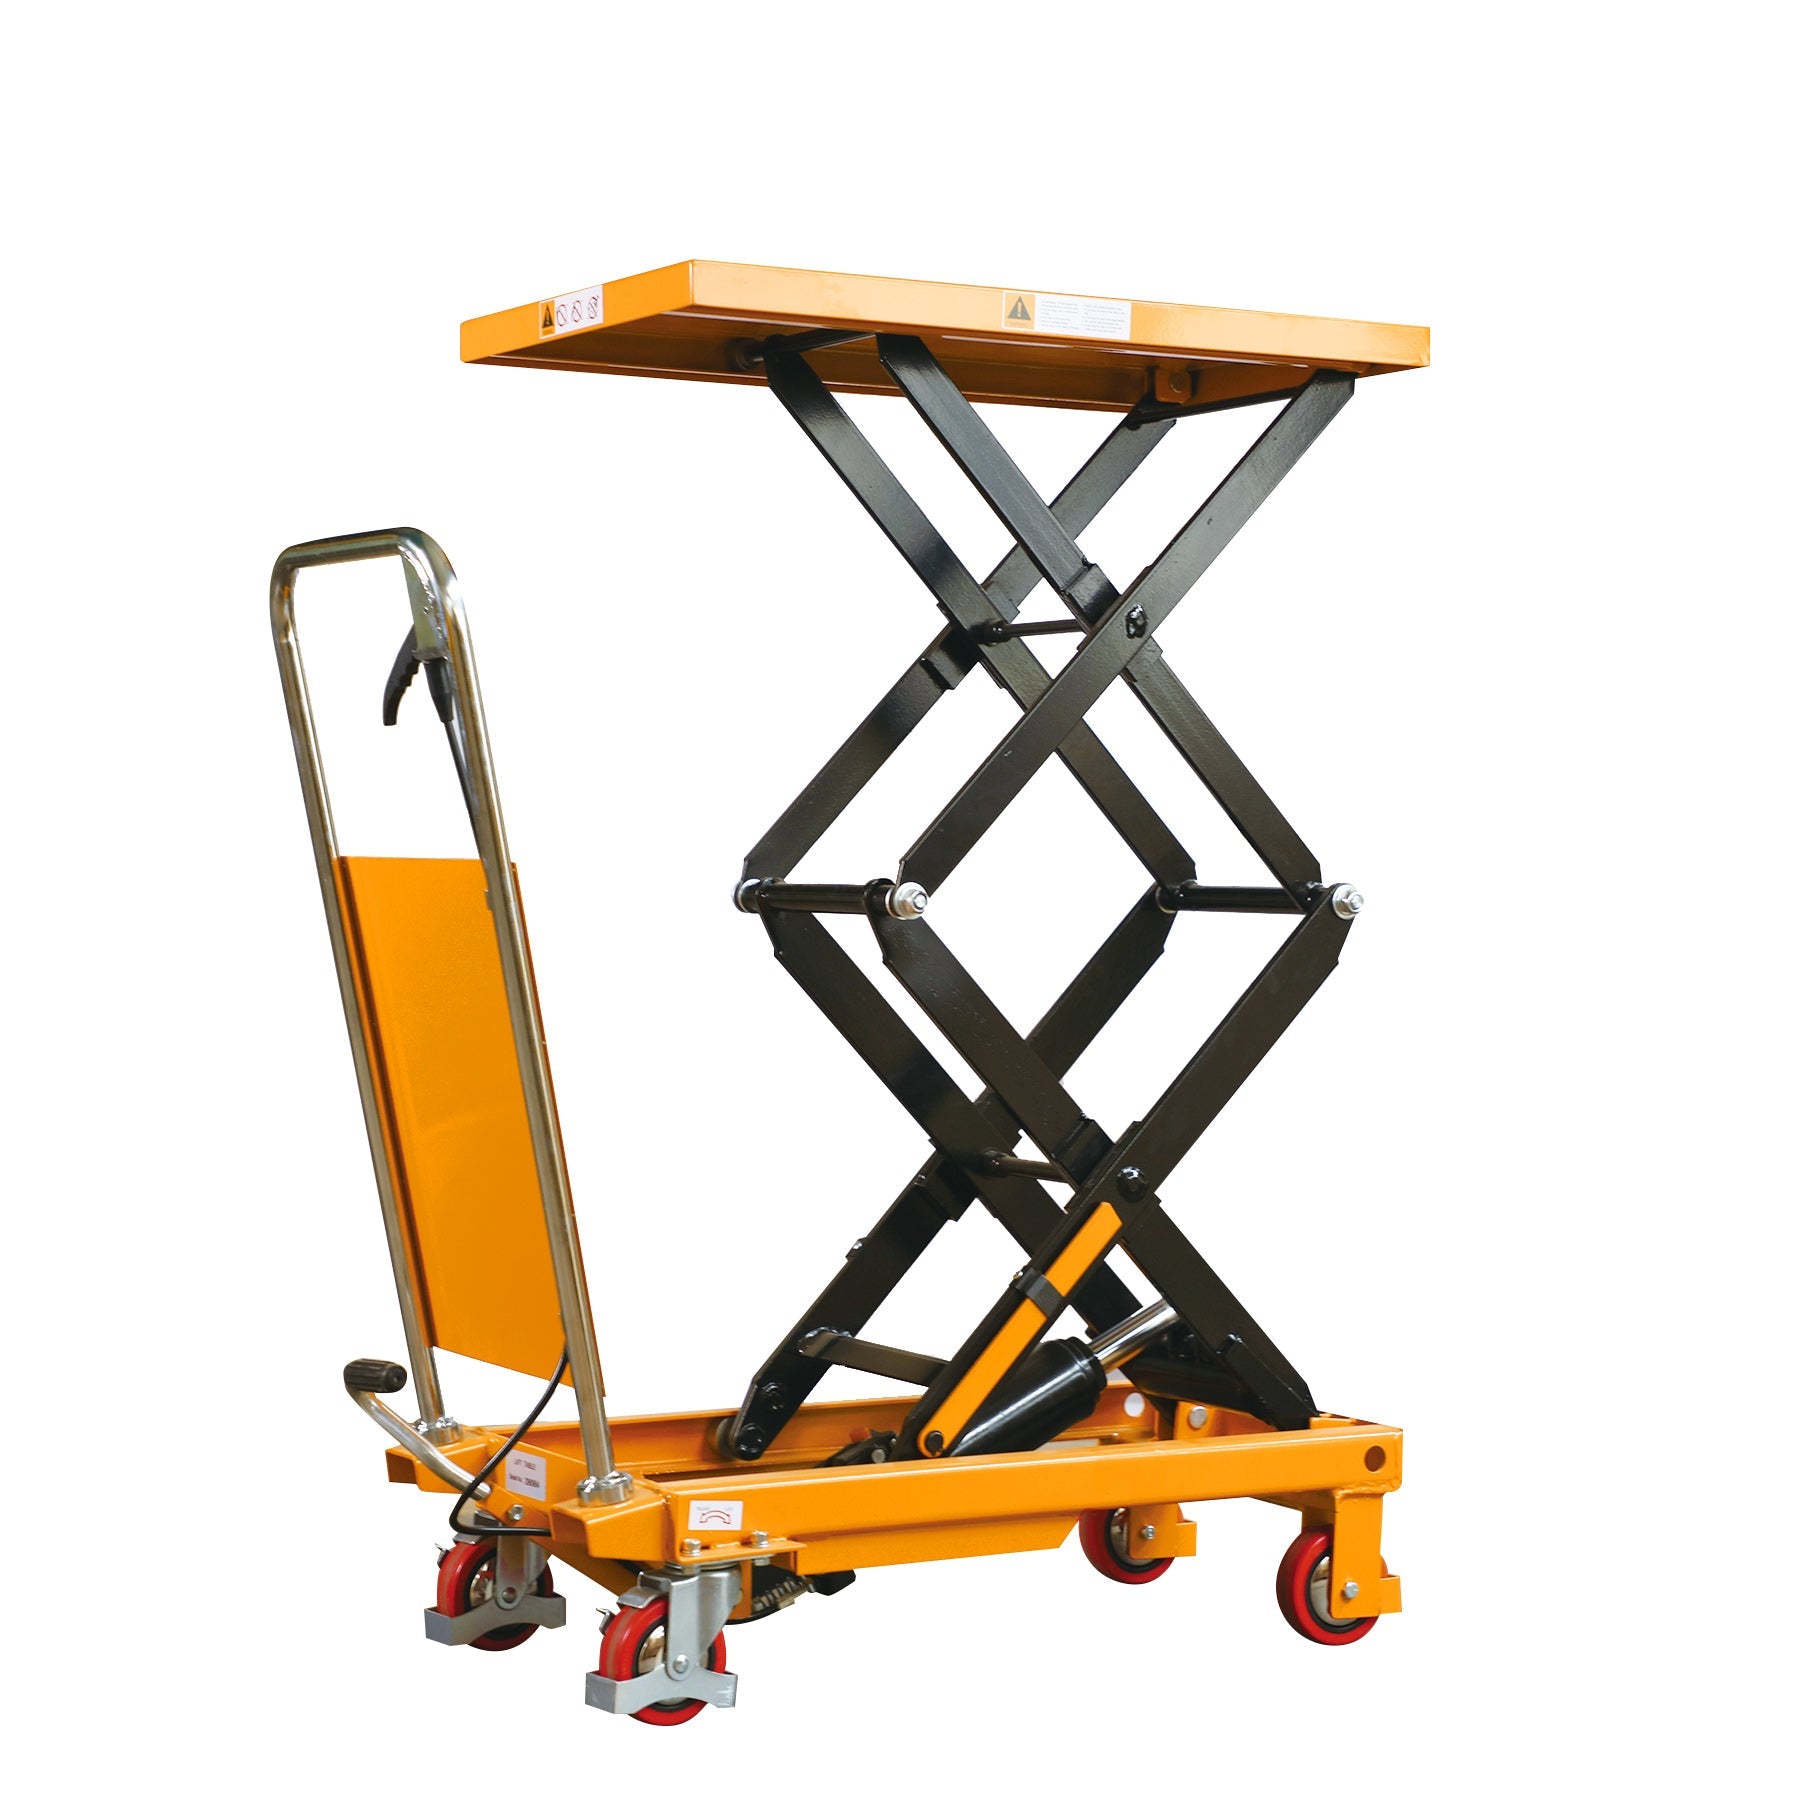 ApolloLift | Double Scissor Lift Table 330lbs 43.3" Lifting Height